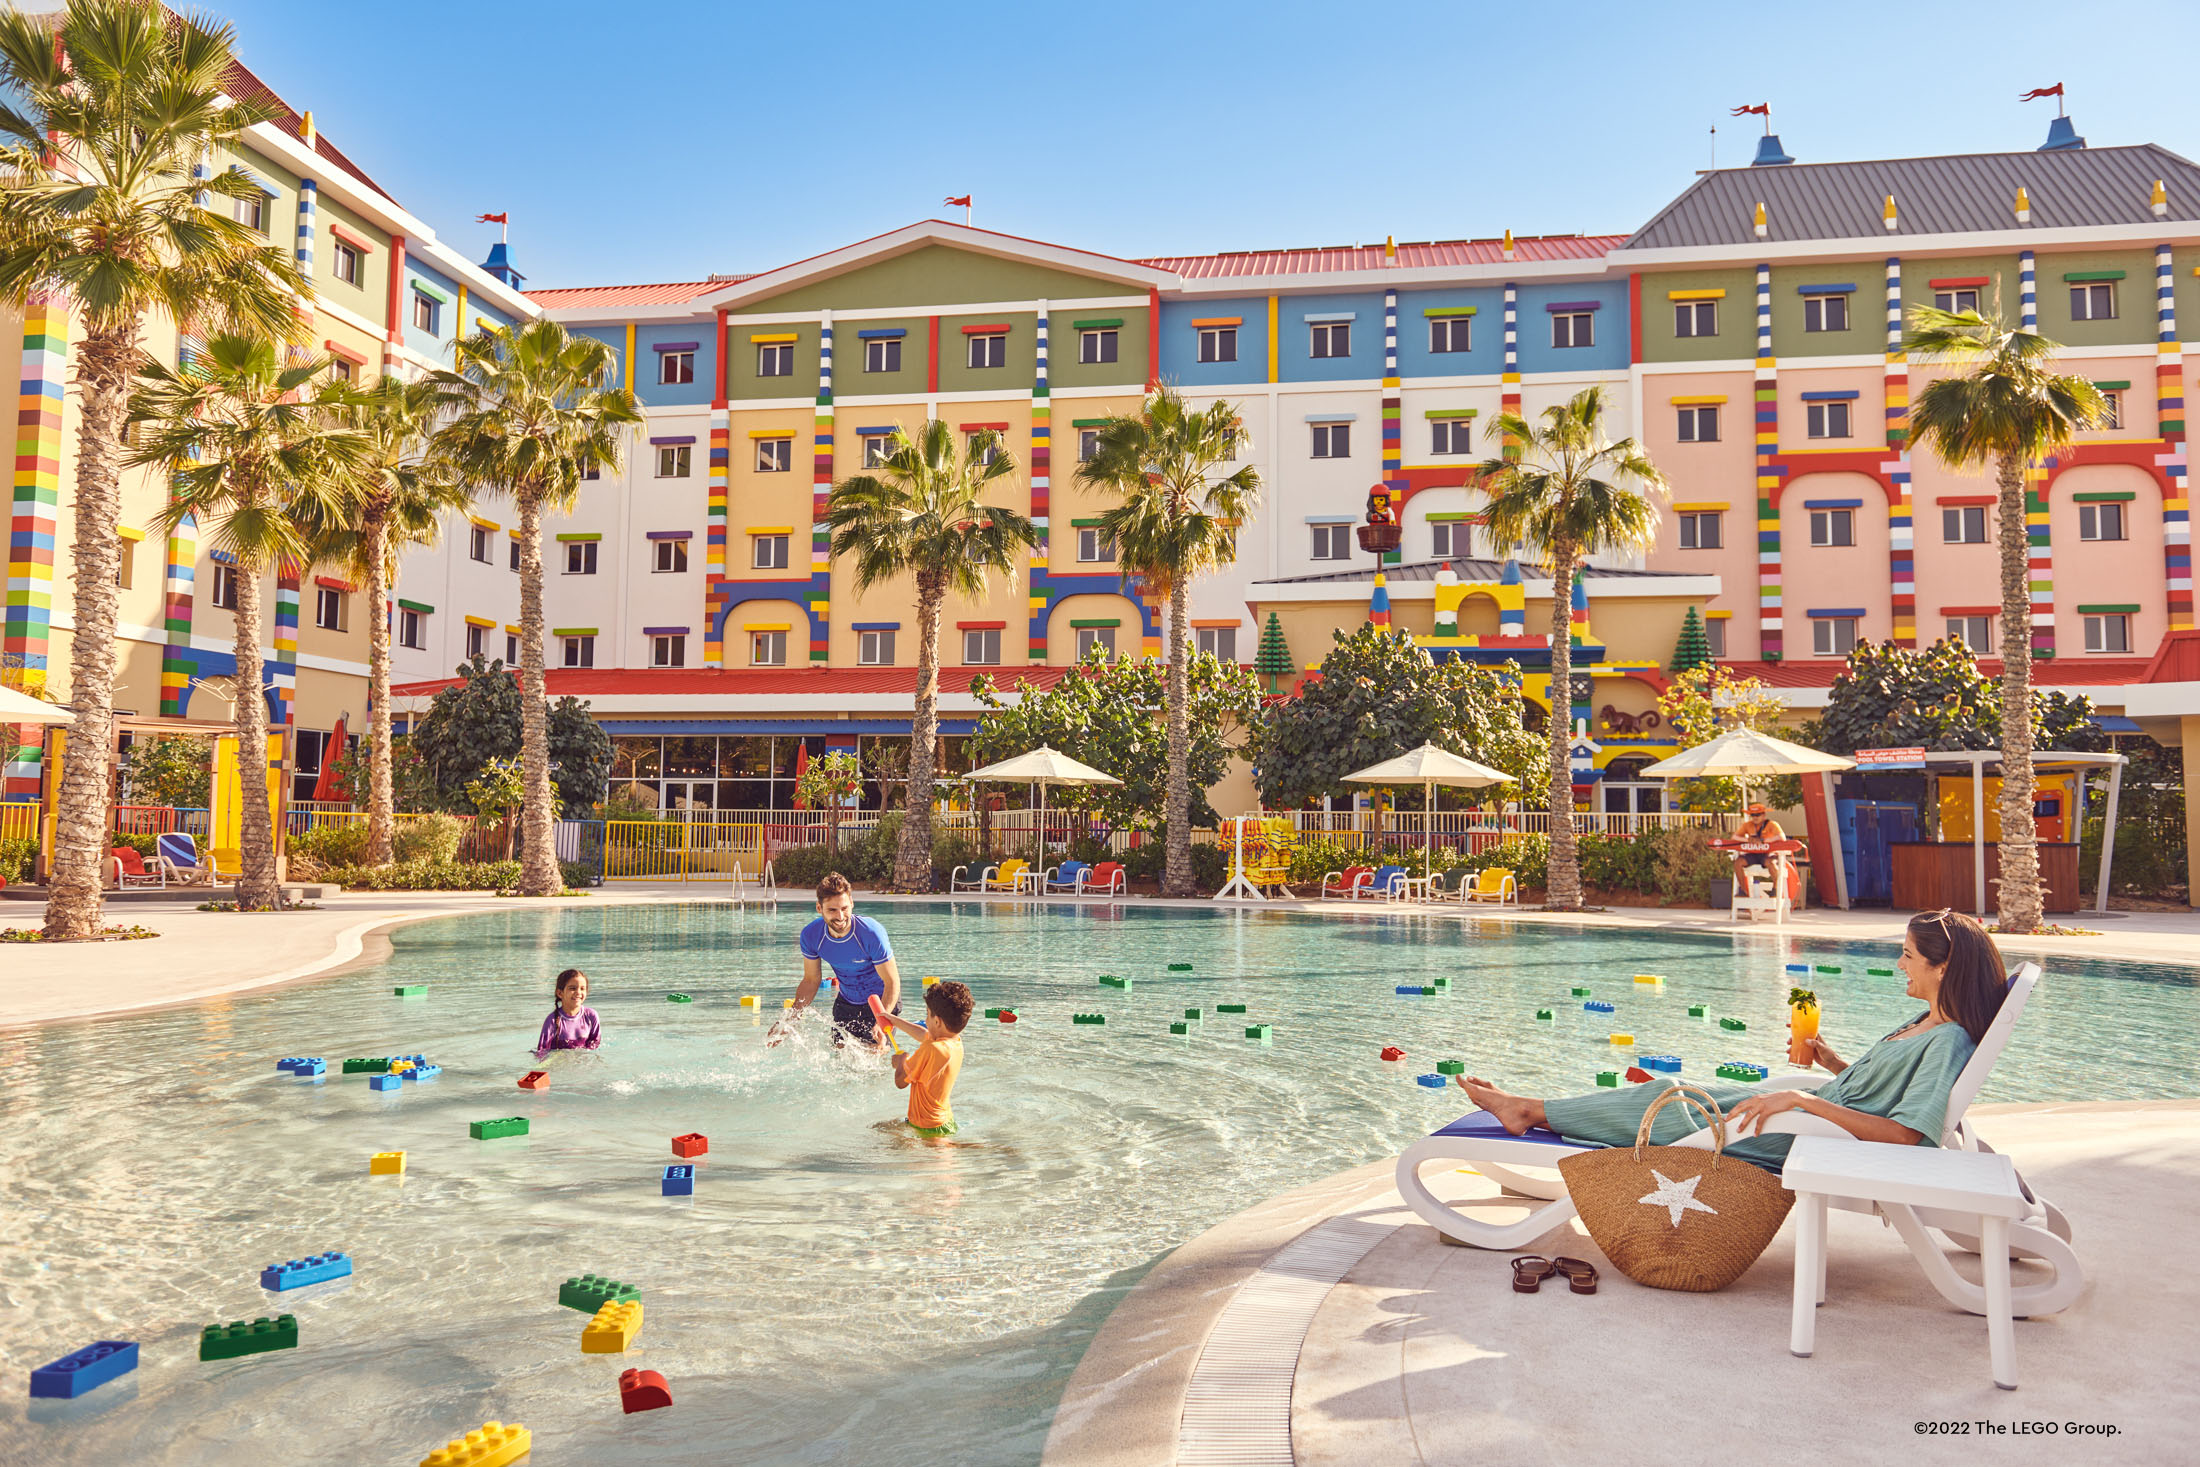 Legoland Hotel’s swimming pool was popular with the kids